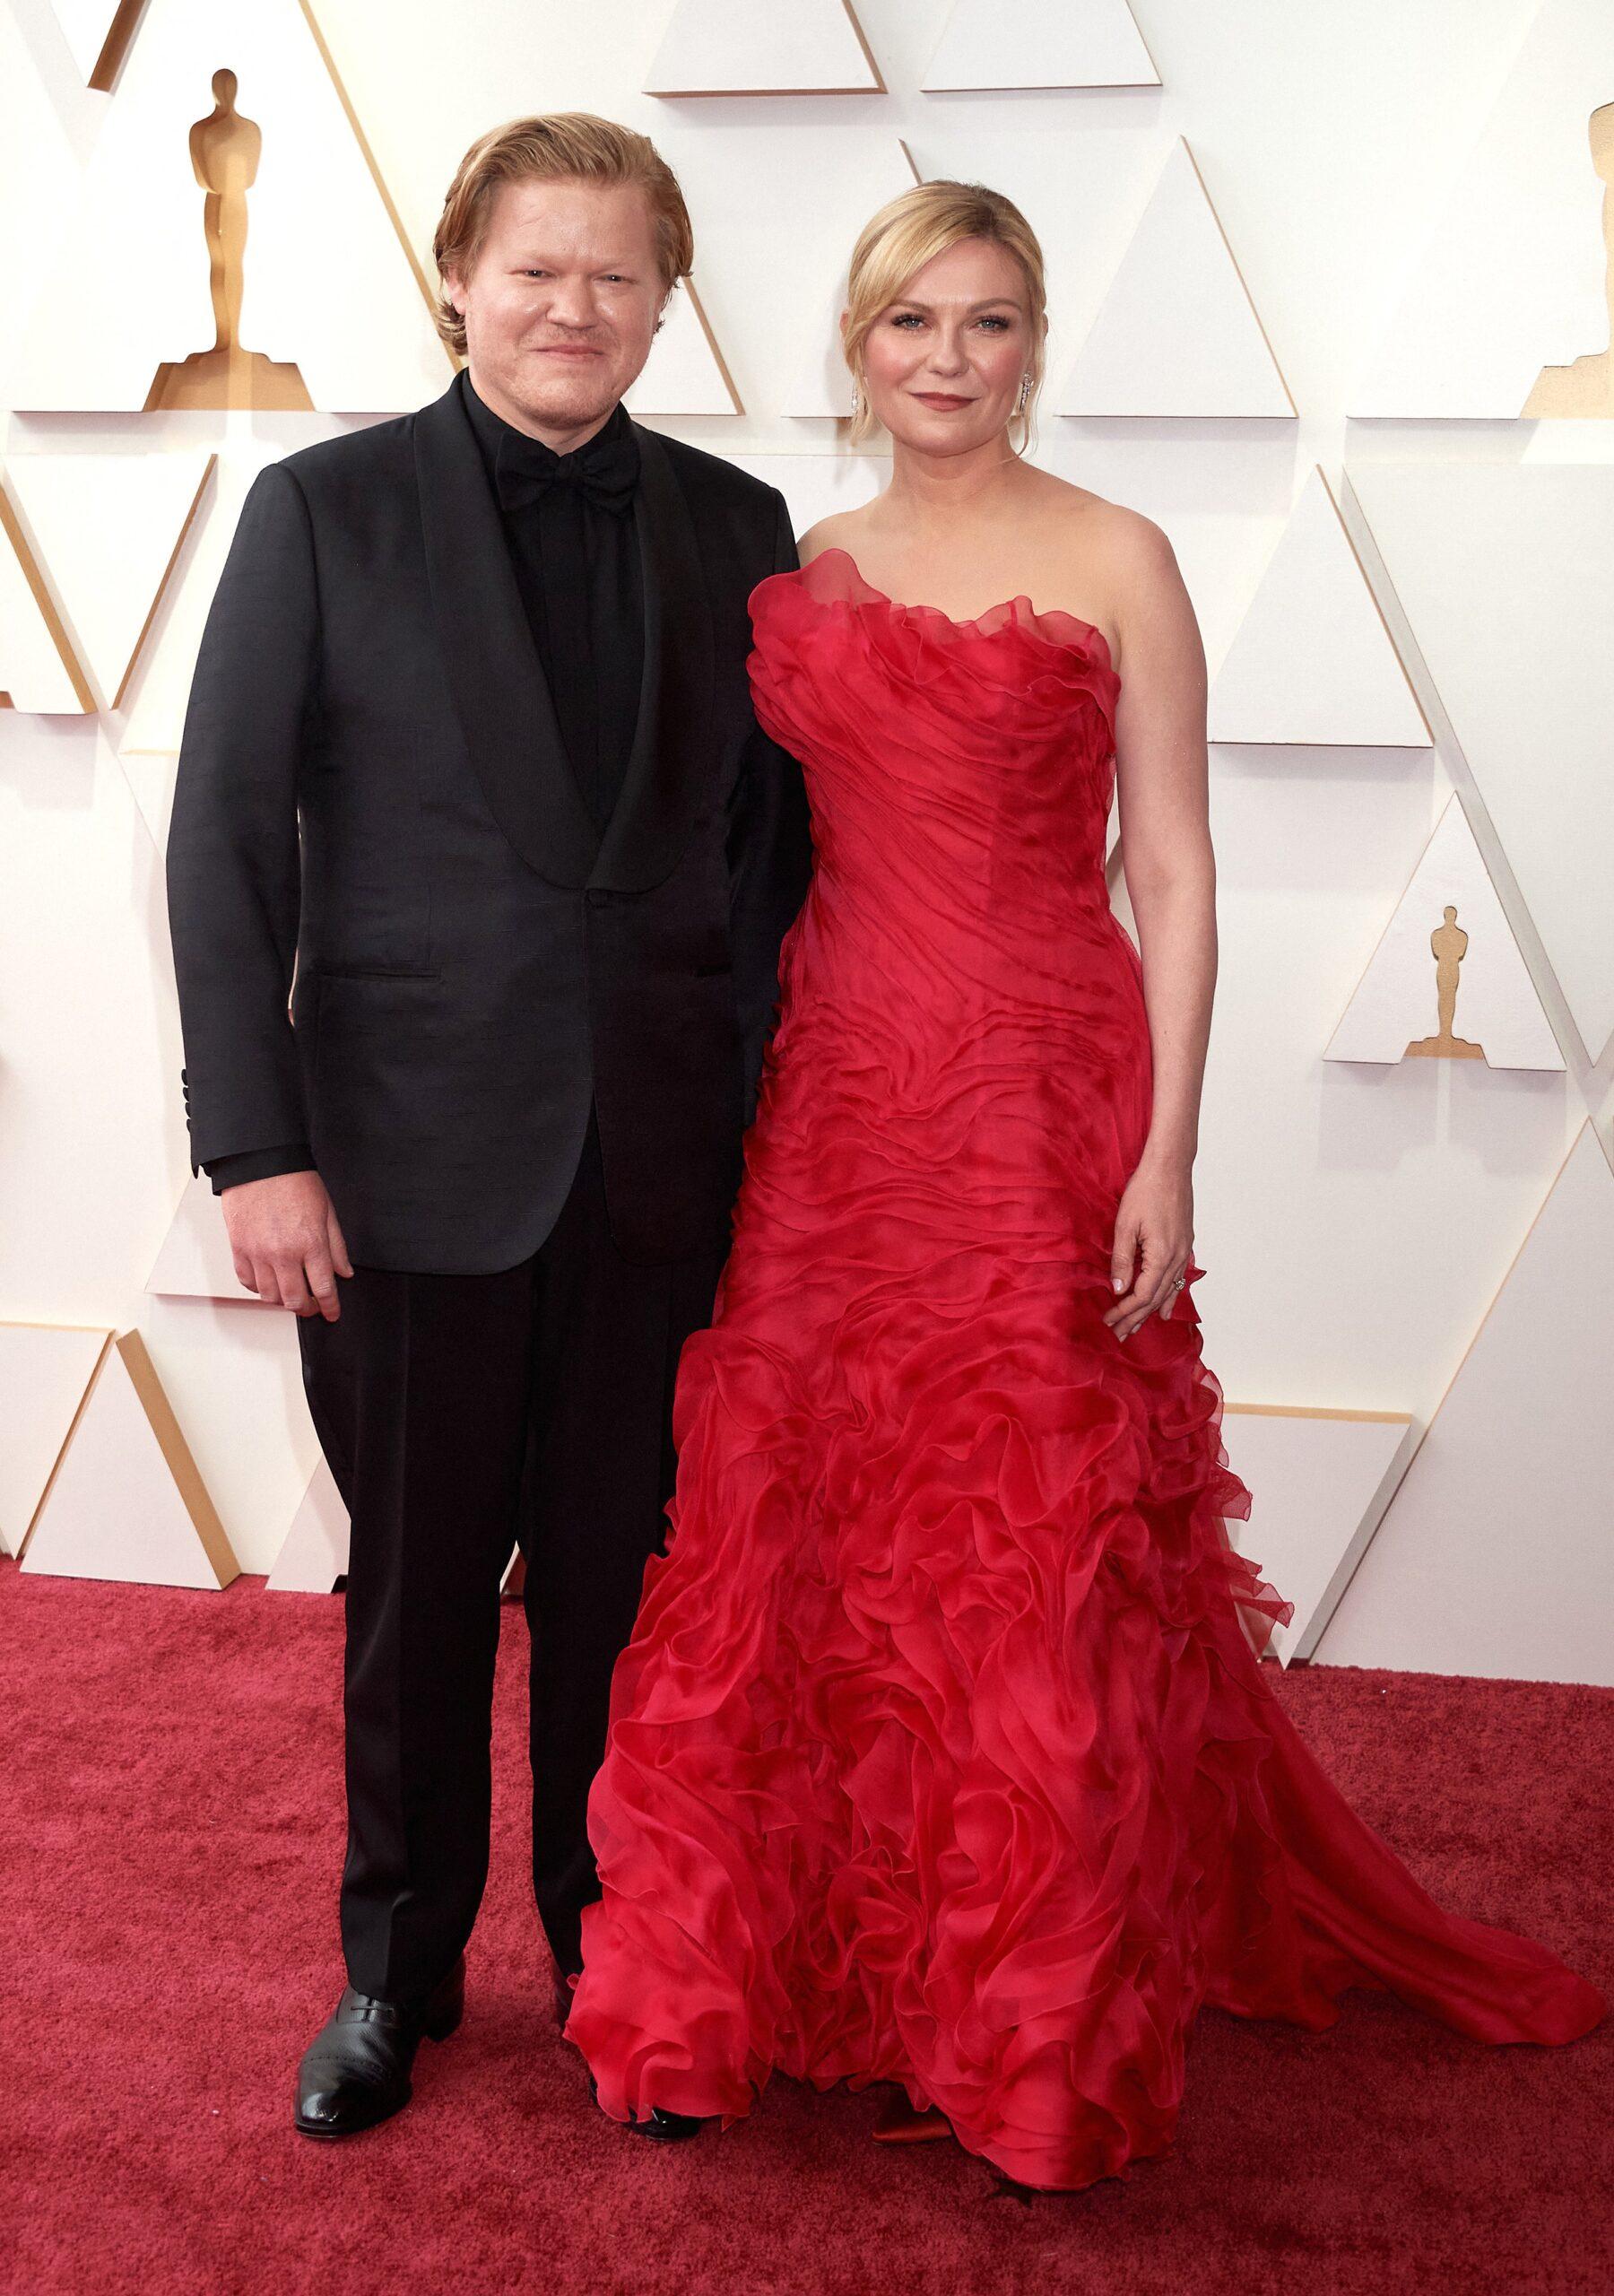 Jesse Plemons and Kirsten Dunst at 94th Academy Awards - Arrivals